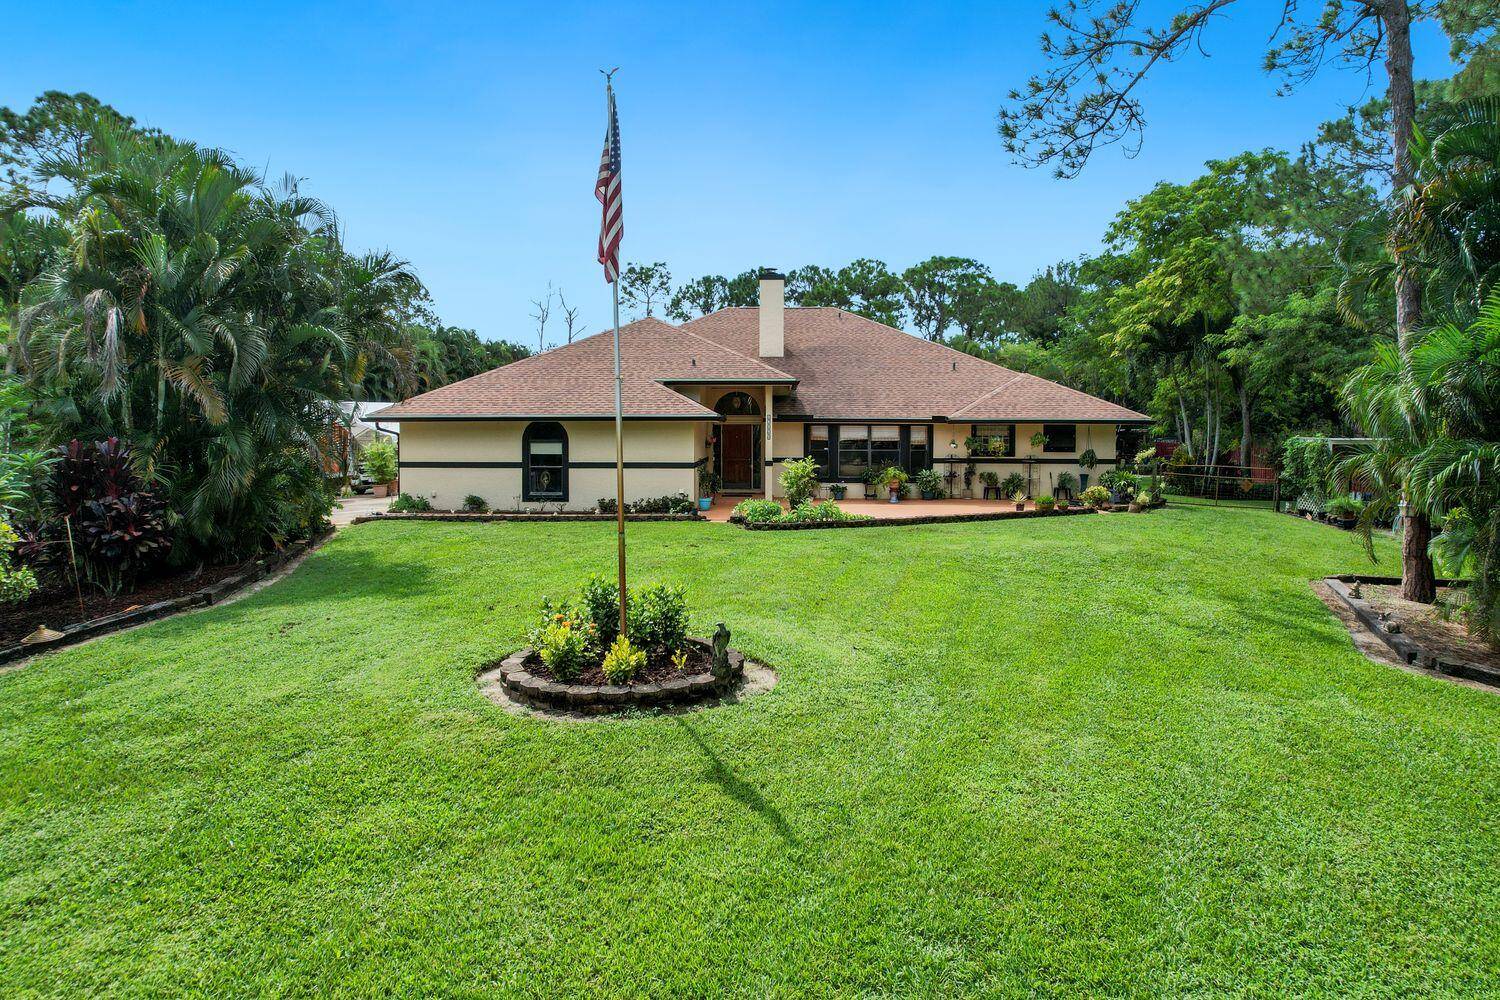 This wonderful home in beautiful Jupiter Farms offers so much.